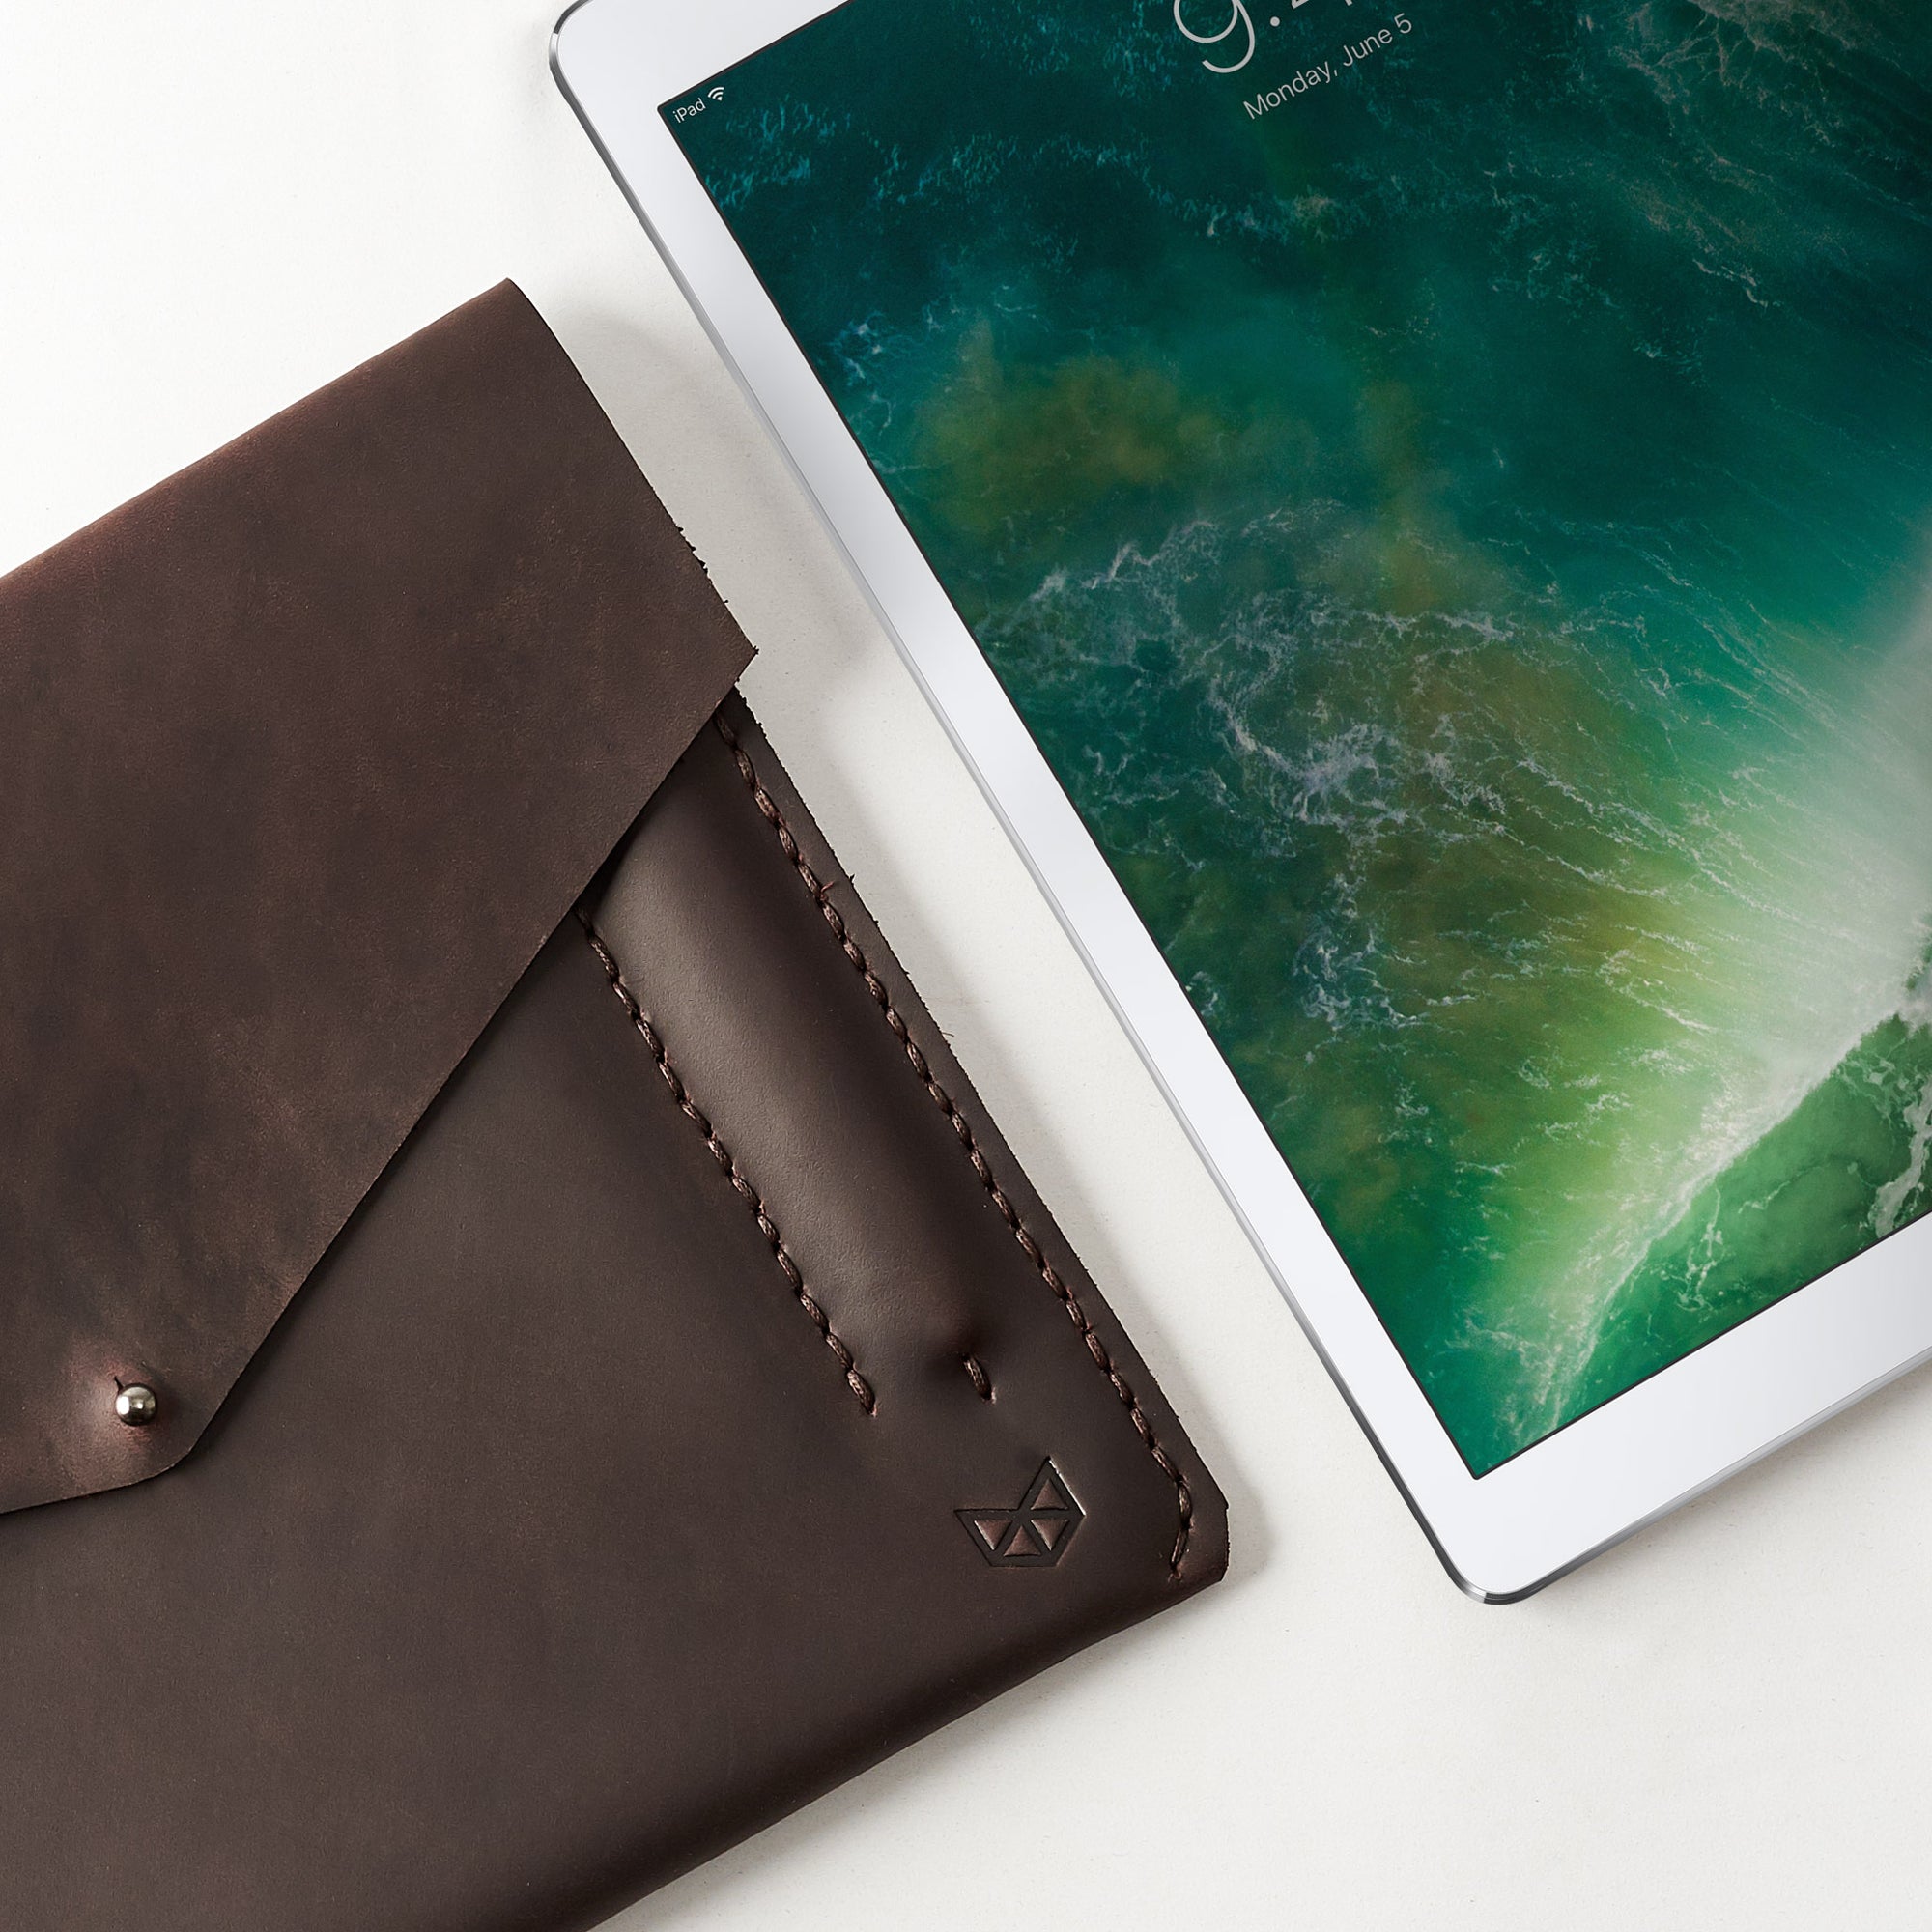 Apple Accessories. iPad Sleeve. iPad Leather Case Marron With Apple Pencil Holder by Capra Leather